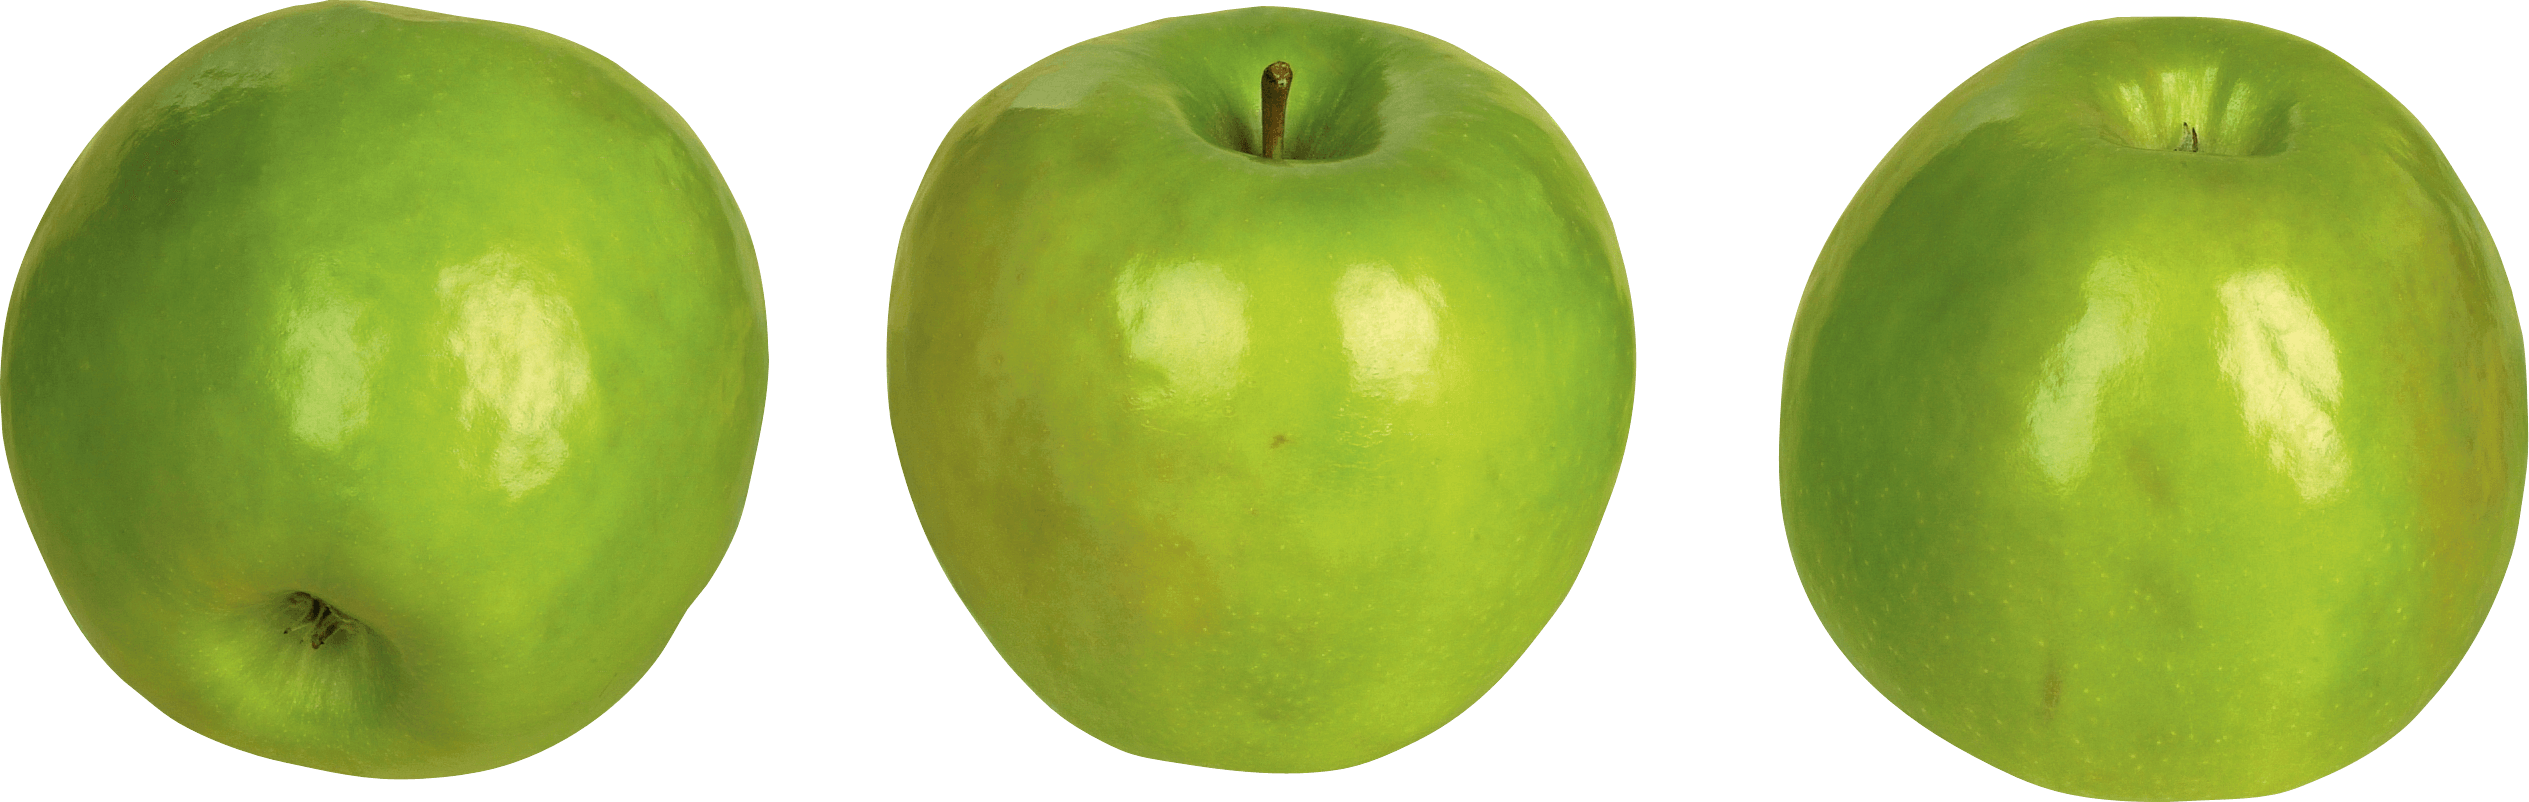 Apples Peach Delicious Paradise Green PNG